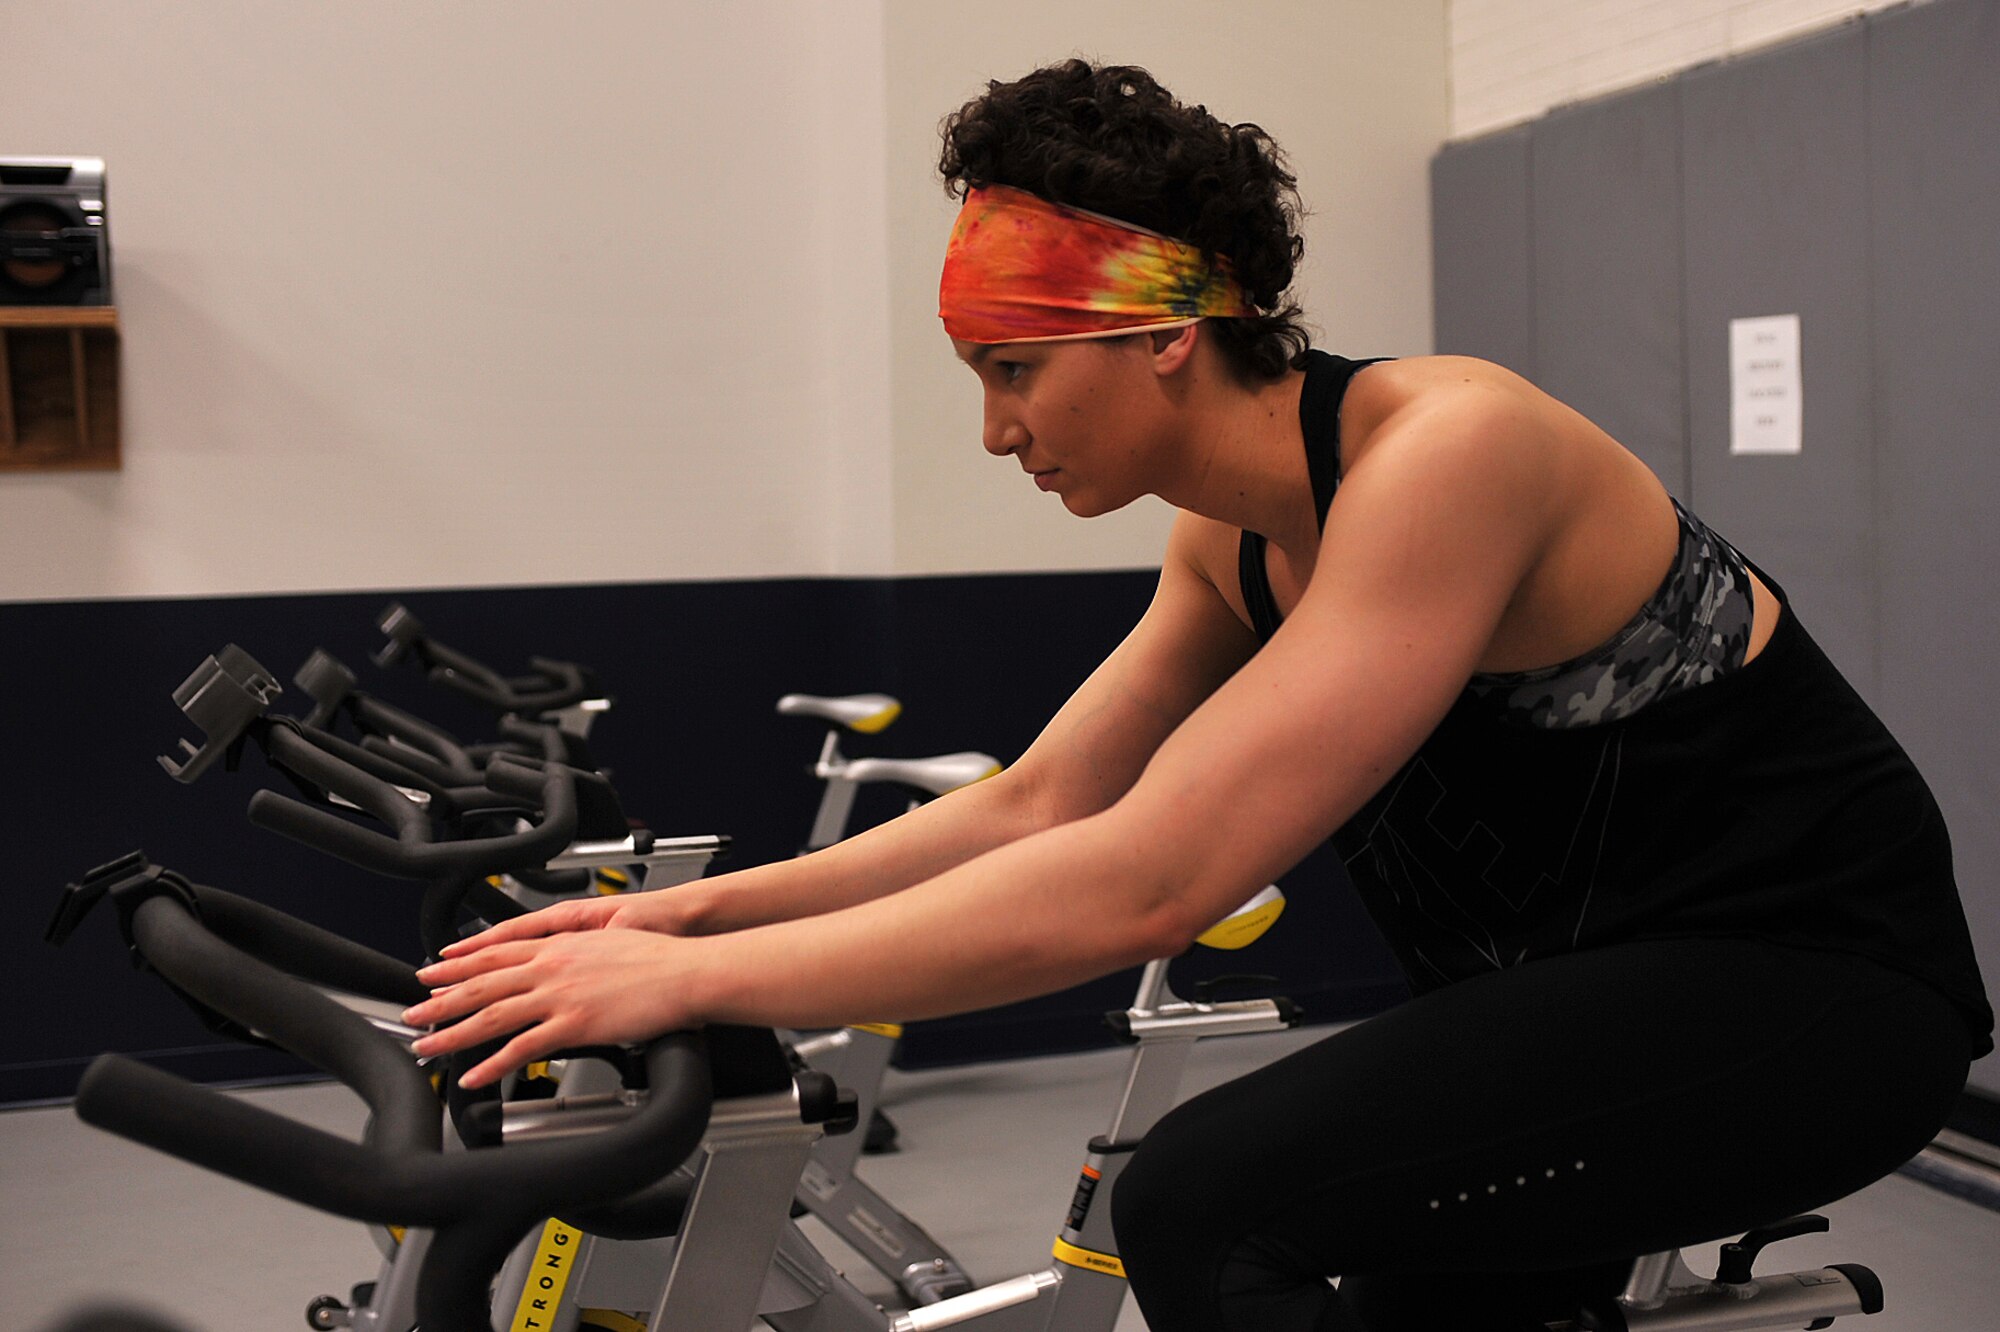 Senior Airman Myiah Castillejo, assigned to the 348th Reconnaissance Squadron on Grand Forks Air Force Base, N.D., uses cardiovascular exercise March 29, 2015, to maintain a healthy heart and healthy lungs after radiation treatment. The radiation was used in conjunction with chemotherapy to treat Hodgkin lymphoma. She was diagnosed in January 2014 and declared cancer free on Jan. 15, 2015. (U.S. Air Force photo/Airman 1st Class Bonnie Grantham)